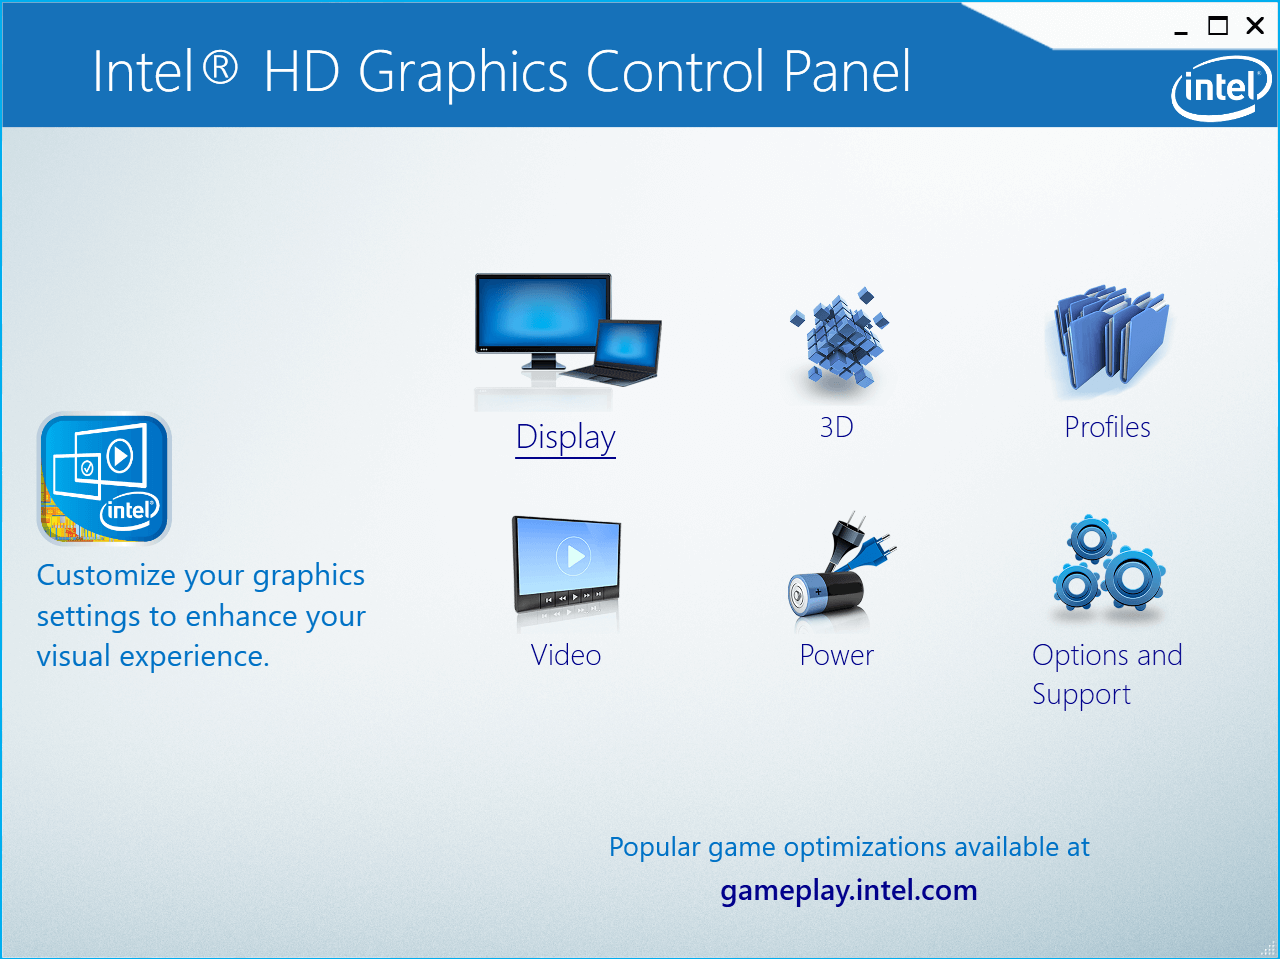 Now click on Display from the Intel HD Graphics Control Panel